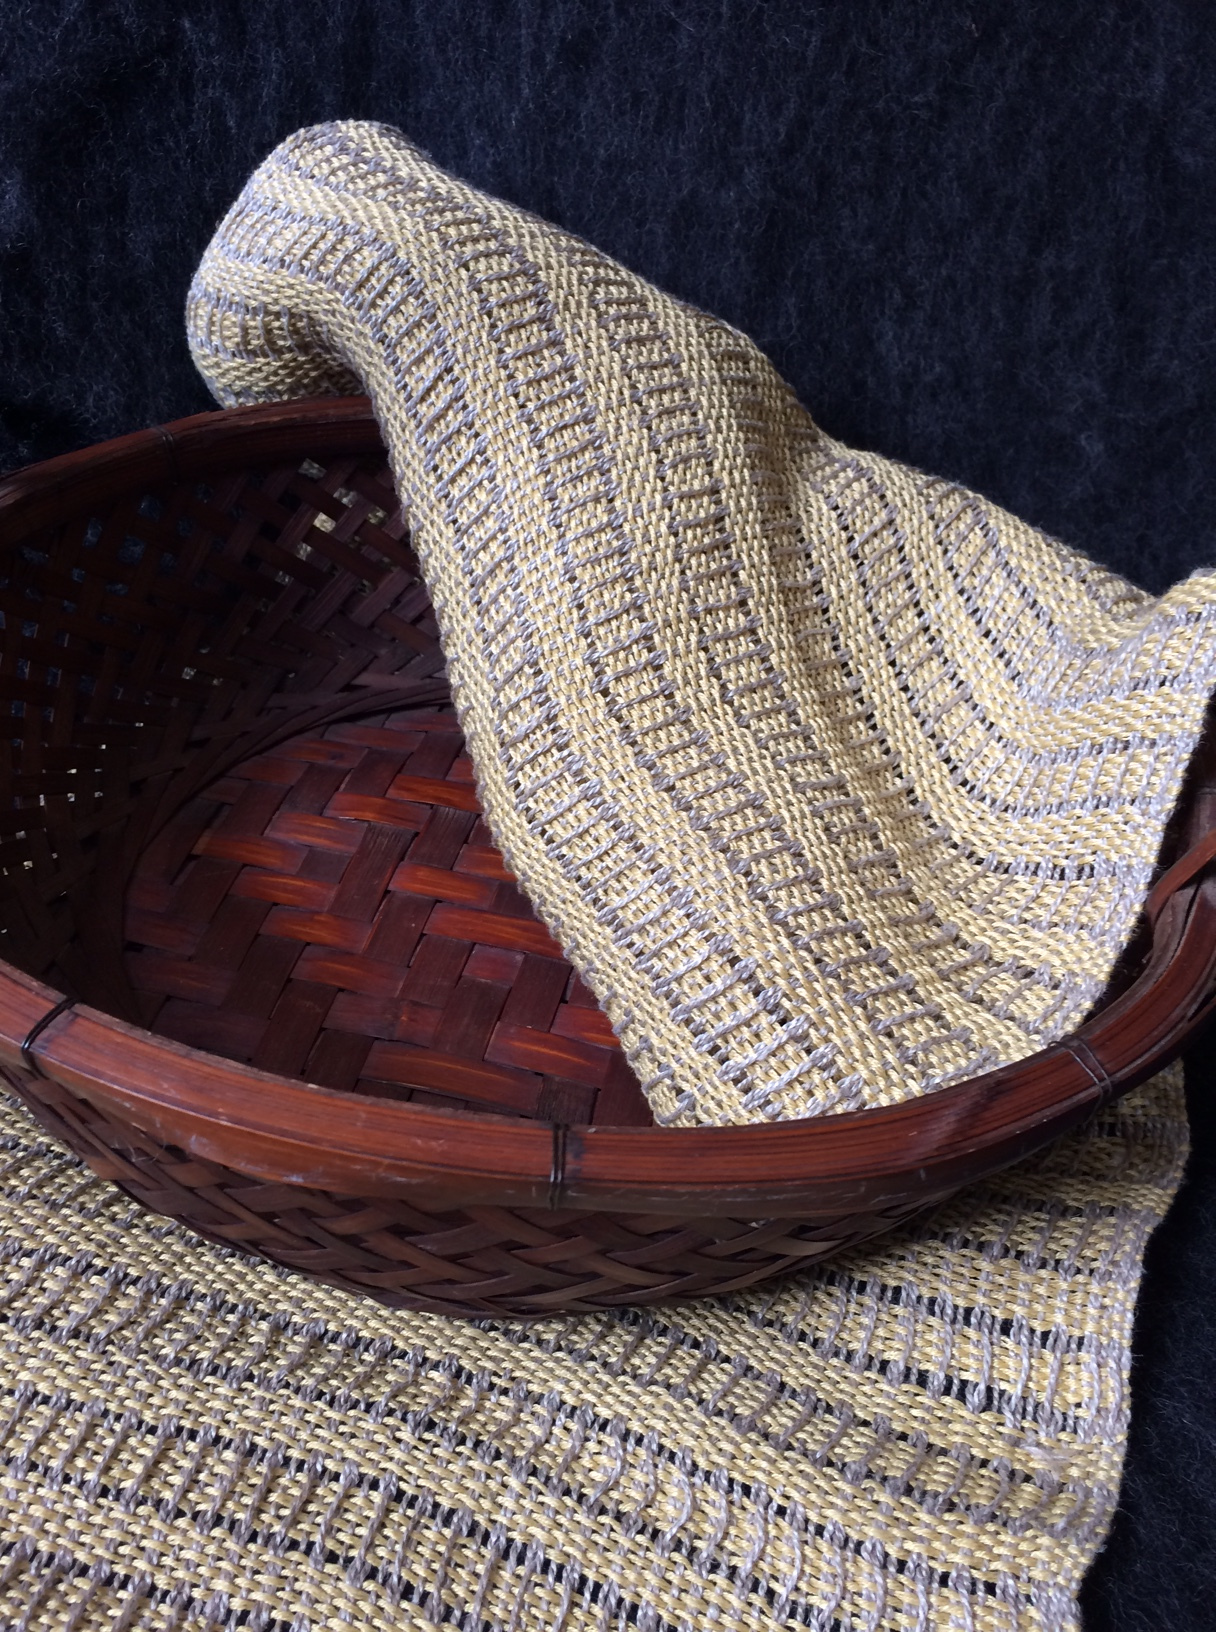 An oval rosy wood open weave basket rests on top of a 14 x 65 inch natural colored  linen table runner. The far end of the runner is folded back into the basket. The weave is made up of horizontal rows of  a natural color ladder stripes against a pale yellow background.